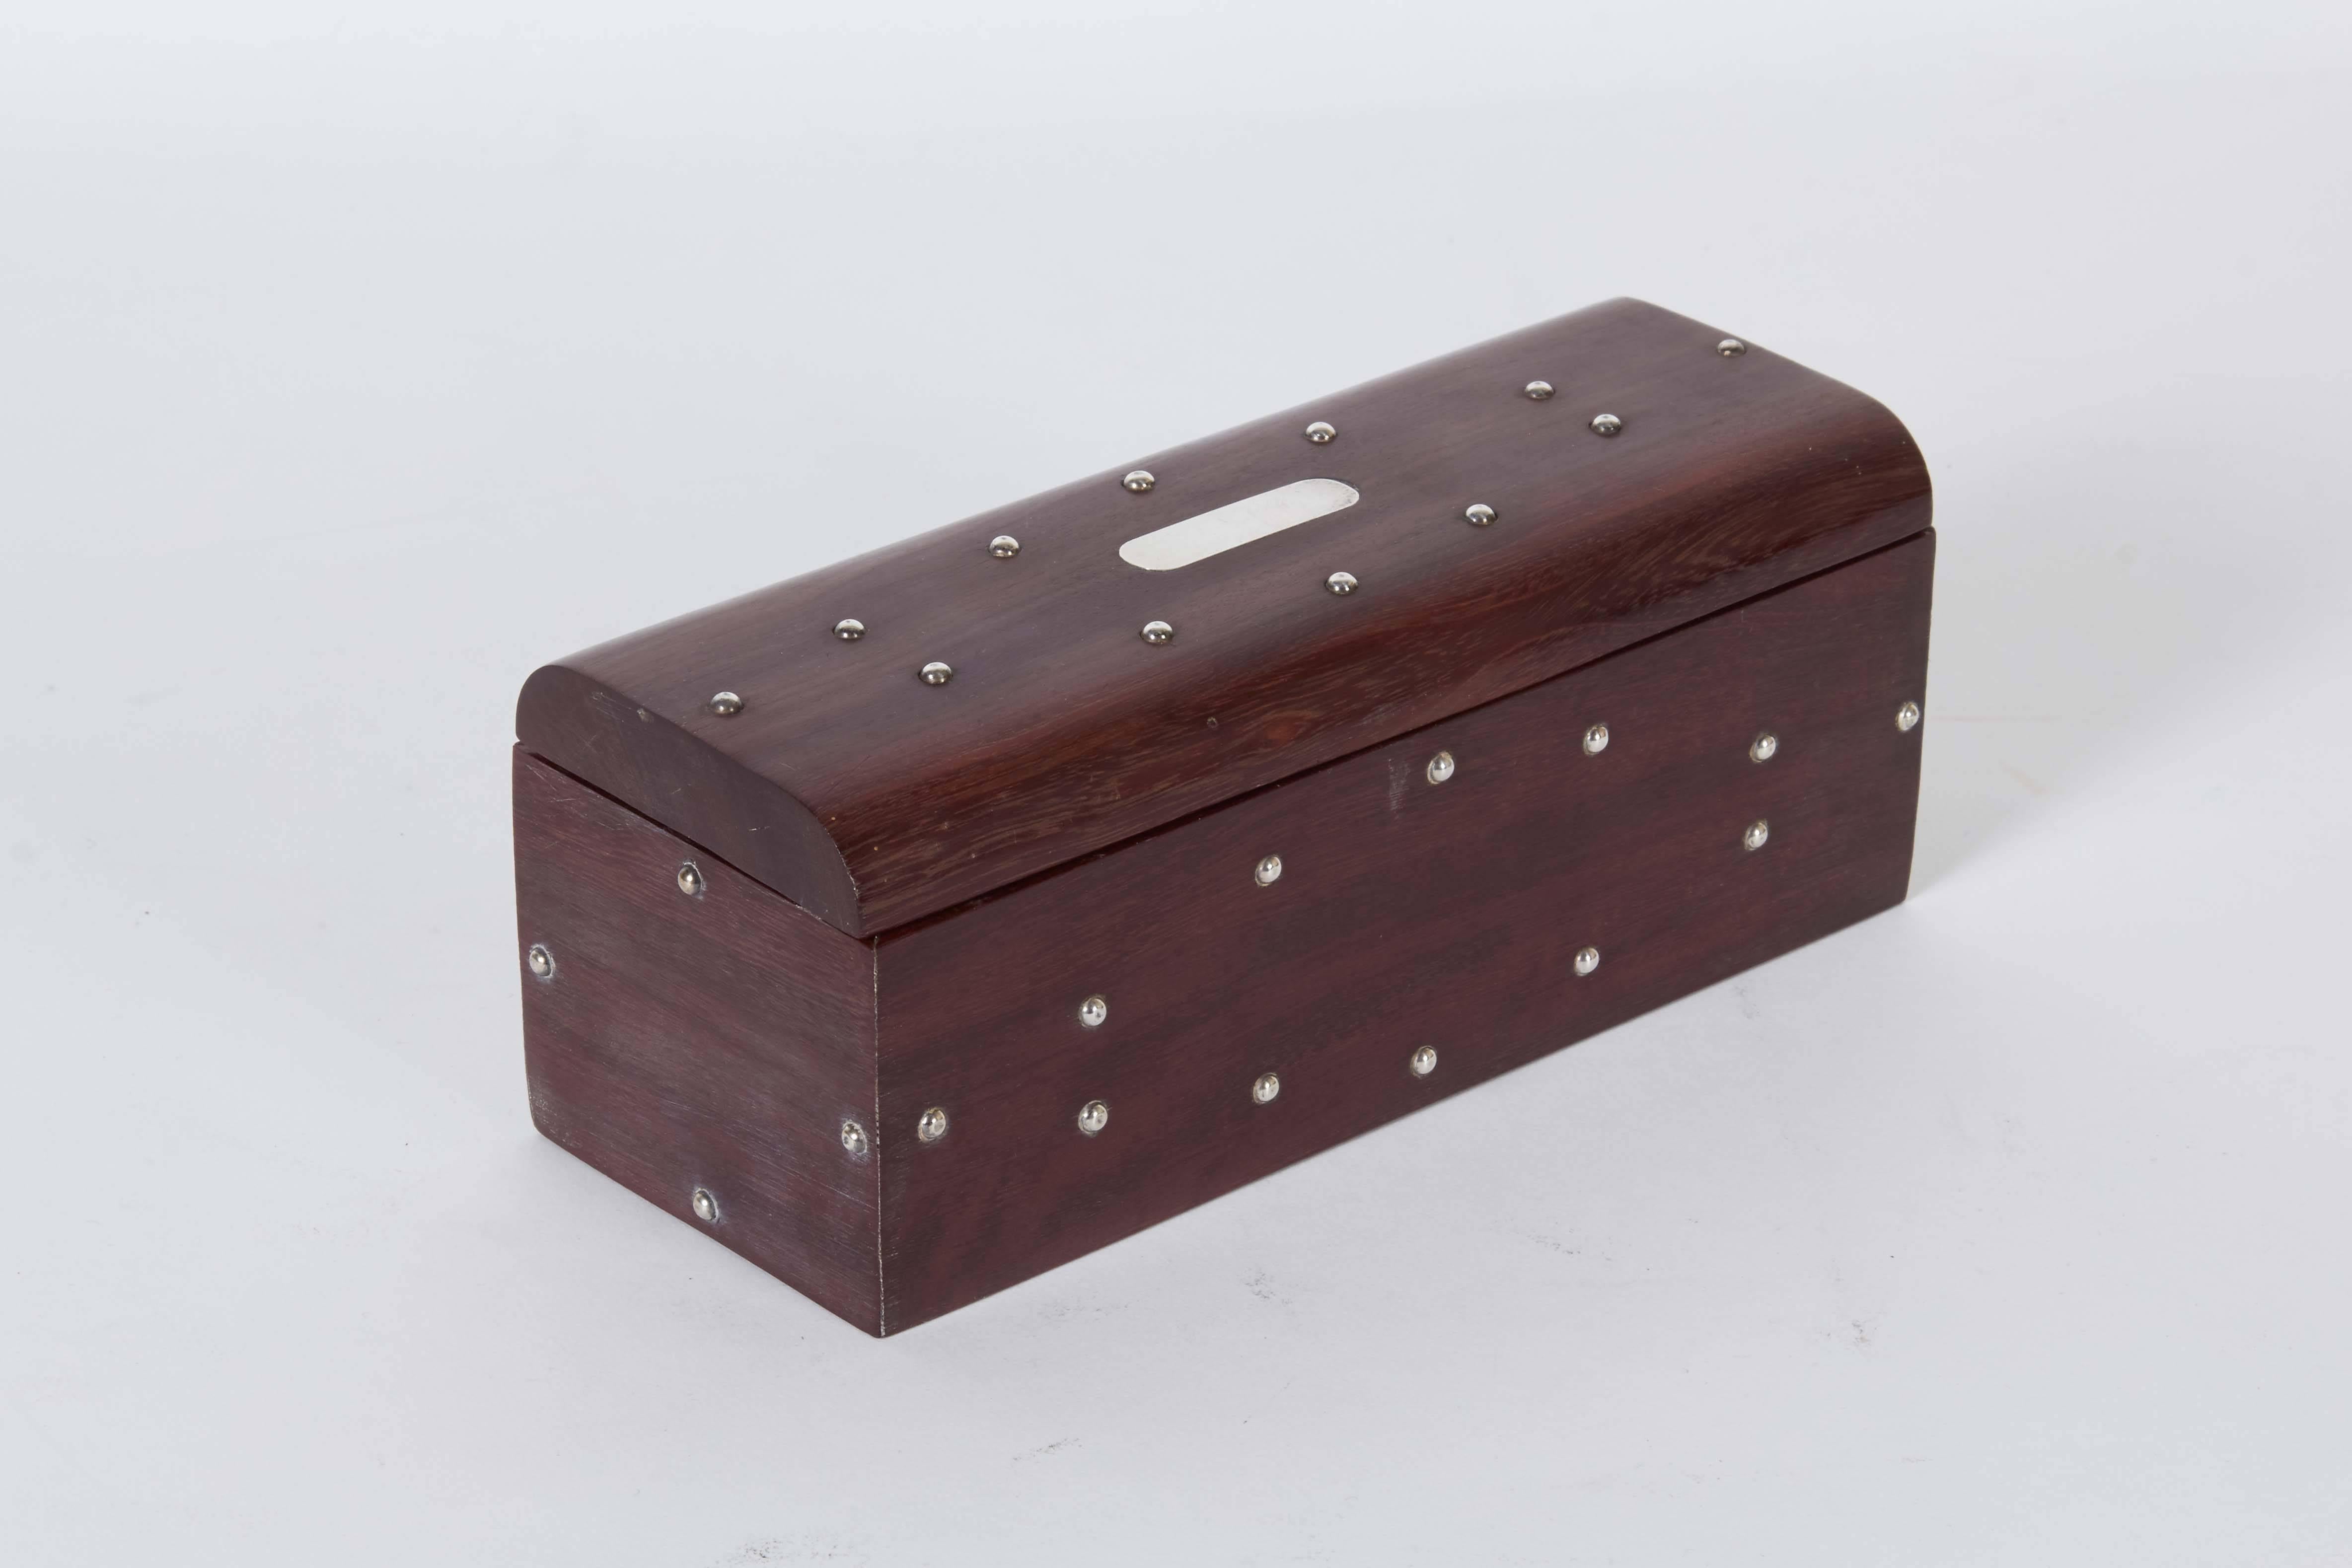 A circa 1970s Mexican Dominoes set, pieces and matching box crafted of rosewood, accented with sterling silver. Very good vintage condition, consistent with age and use.

10790